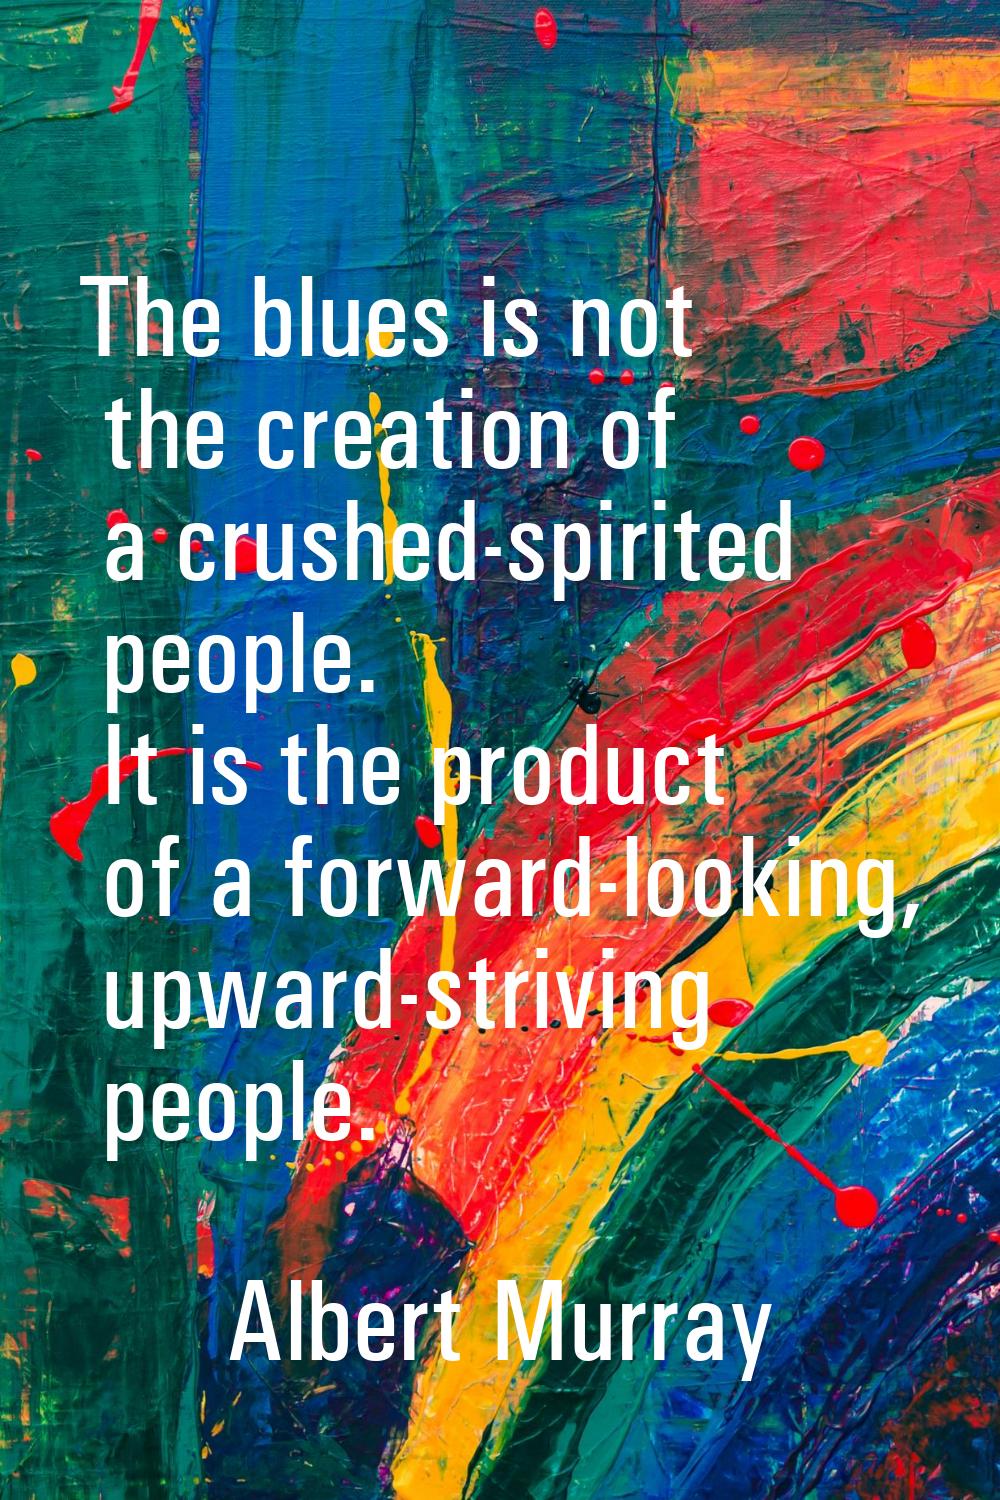 The blues is not the creation of a crushed-spirited people. It is the product of a forward-looking,